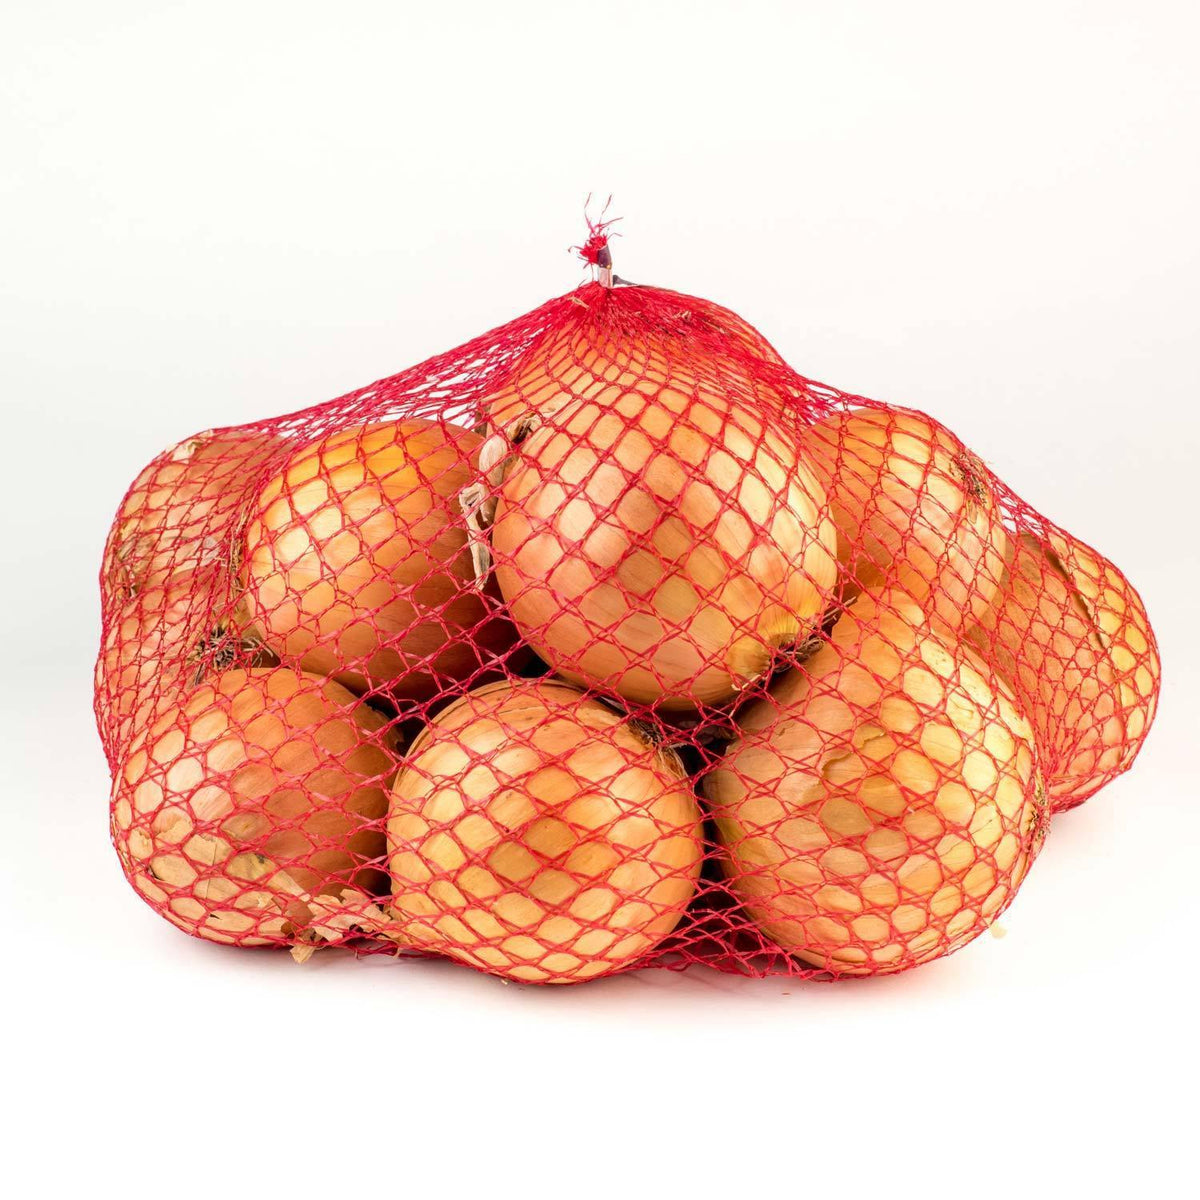 Yellow Onion Bag 5lb - Cartly - Indian Grocery Store